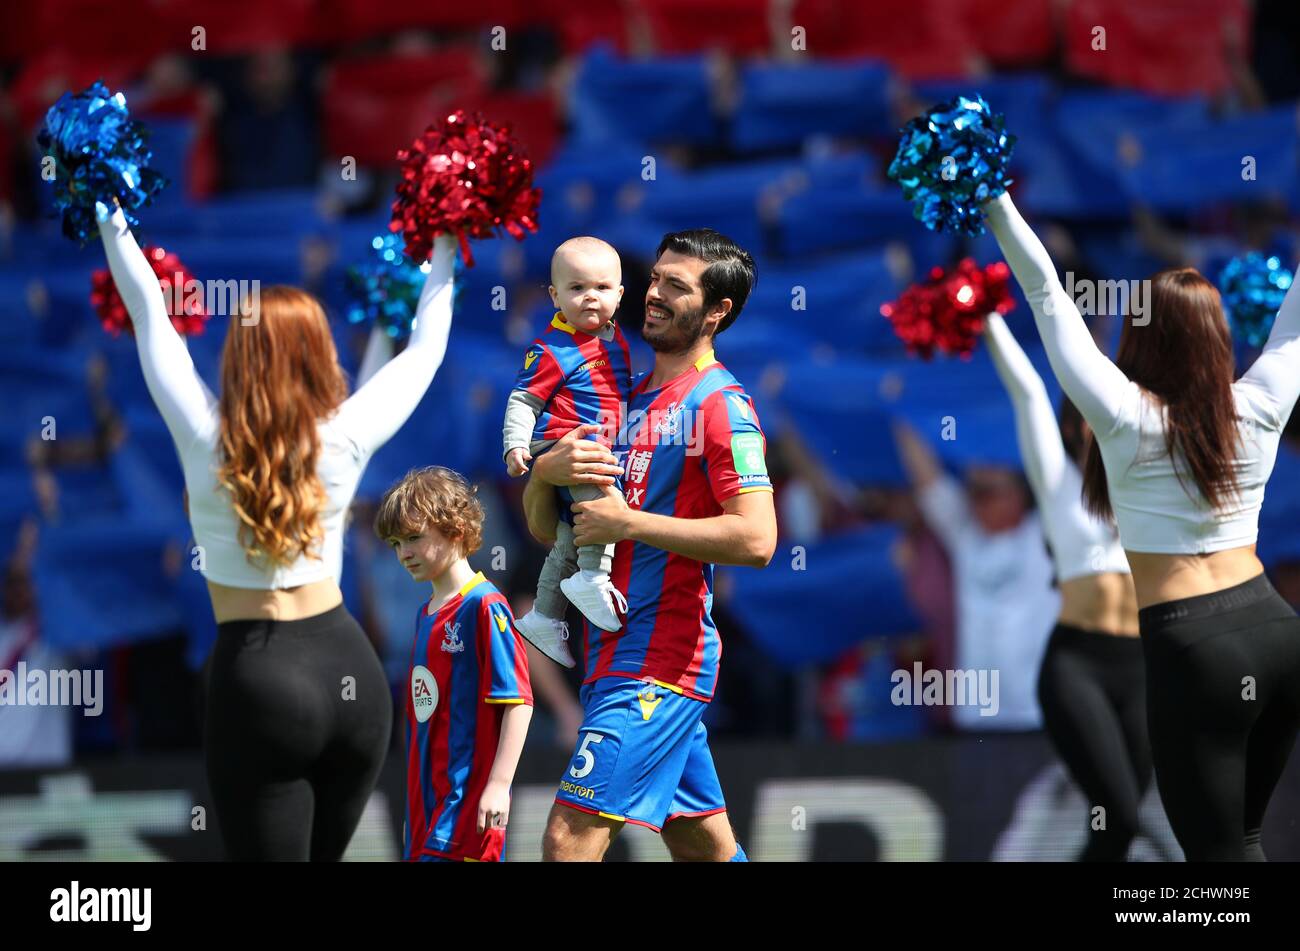 Soccer Football - Premier League - Crystal Palace vs West Bromwich Albion - Selhurst Park, London, Britain - May 13, 2018   Crystal Palace's James Tomkins walks out with children before the match   REUTERS/Hannah McKay    EDITORIAL USE ONLY. No use with unauthorized audio, video, data, fixture lists, club/league logos or "live" services. Online in-match use limited to 75 images, no video emulation. No use in betting, games or single club/league/player publications.  Please contact your account representative for further details. Stock Photo